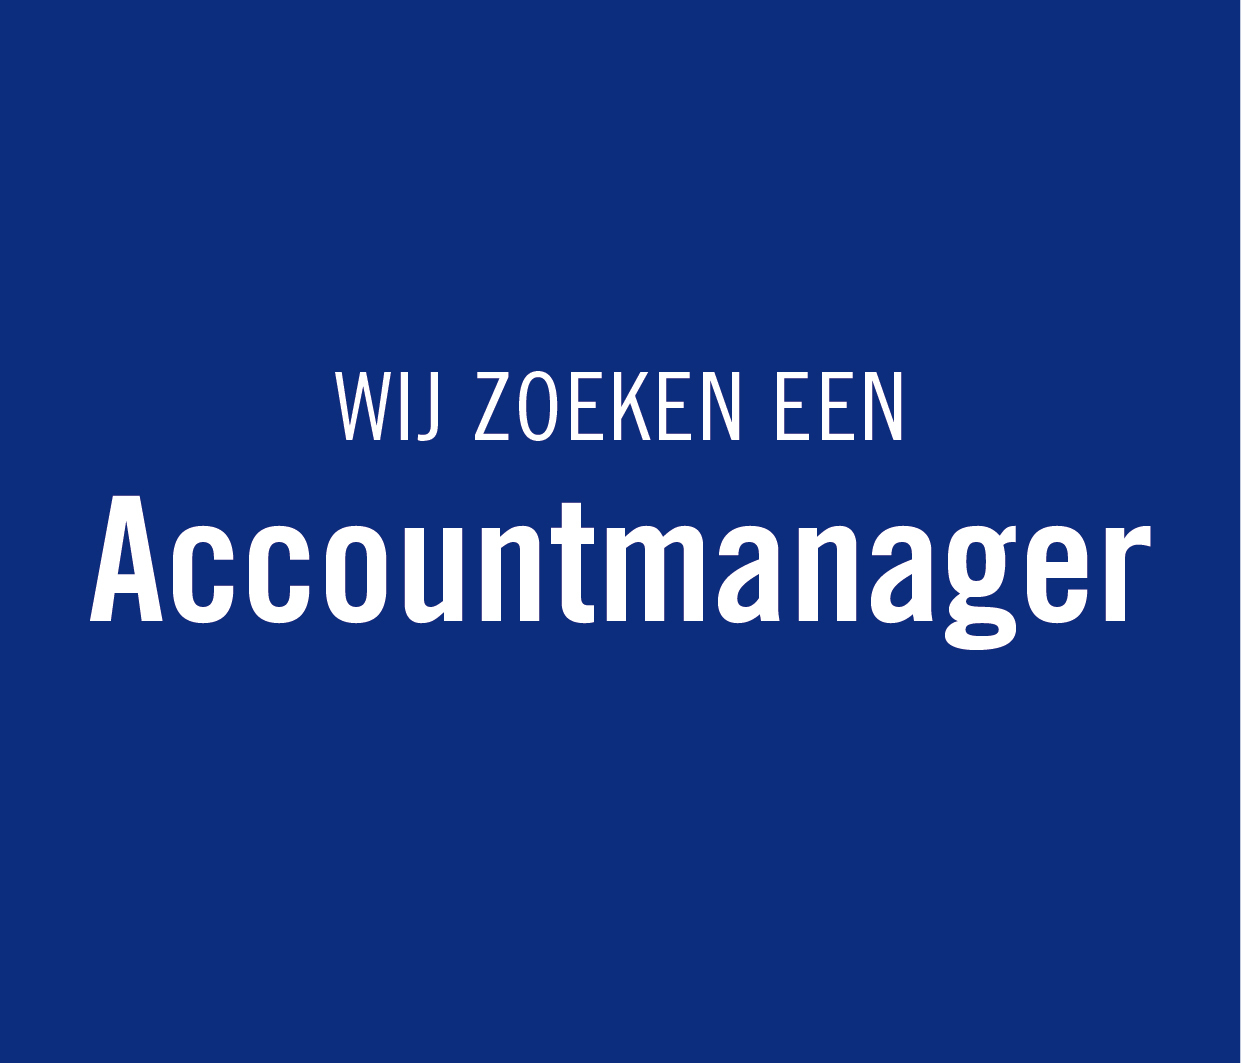 Vacature accountmanager